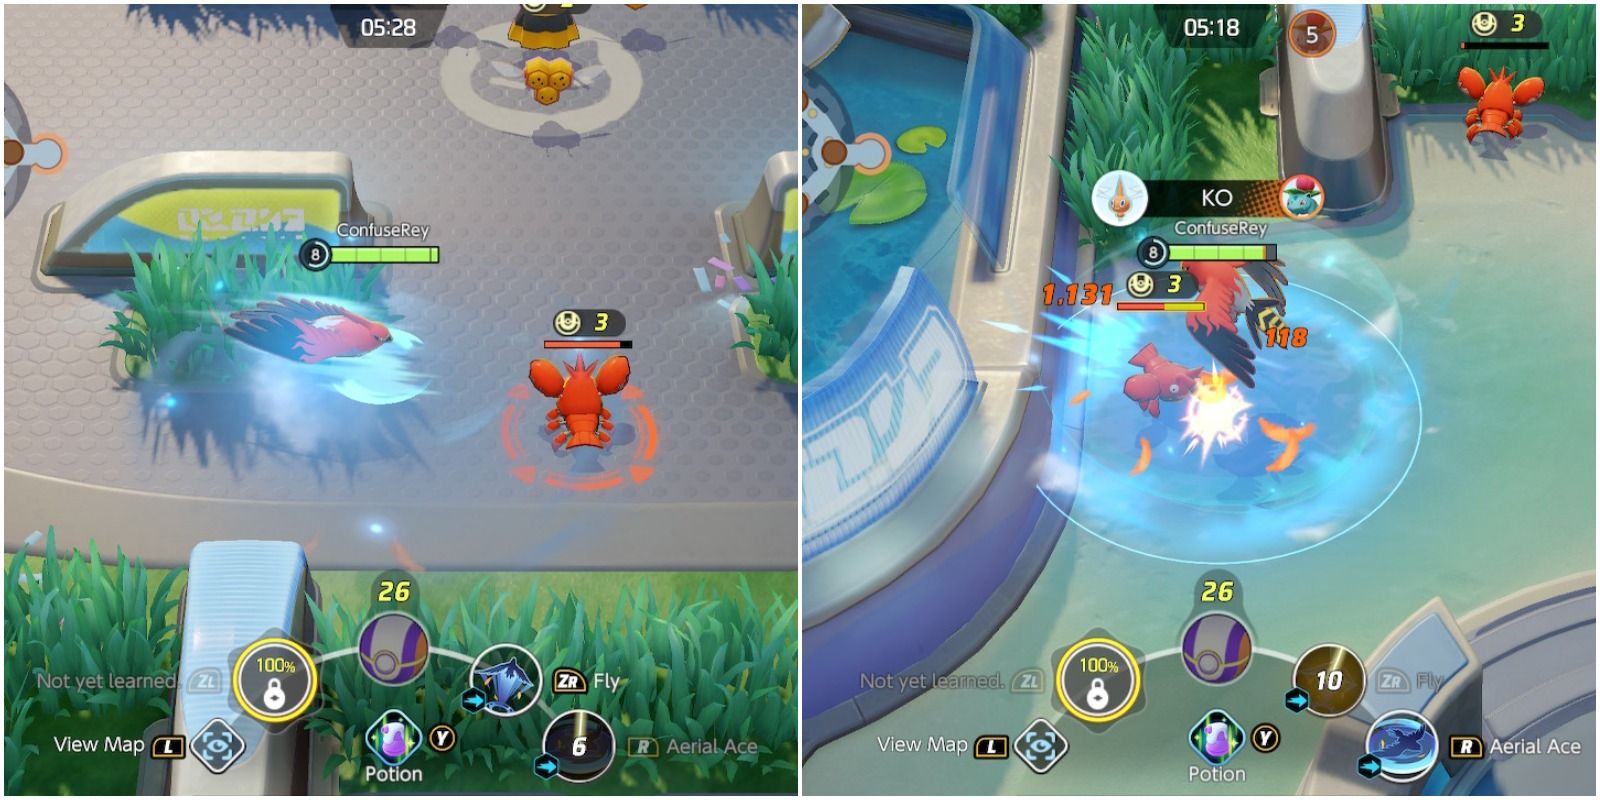 talonflame using flying attacks that boost basic attacks.